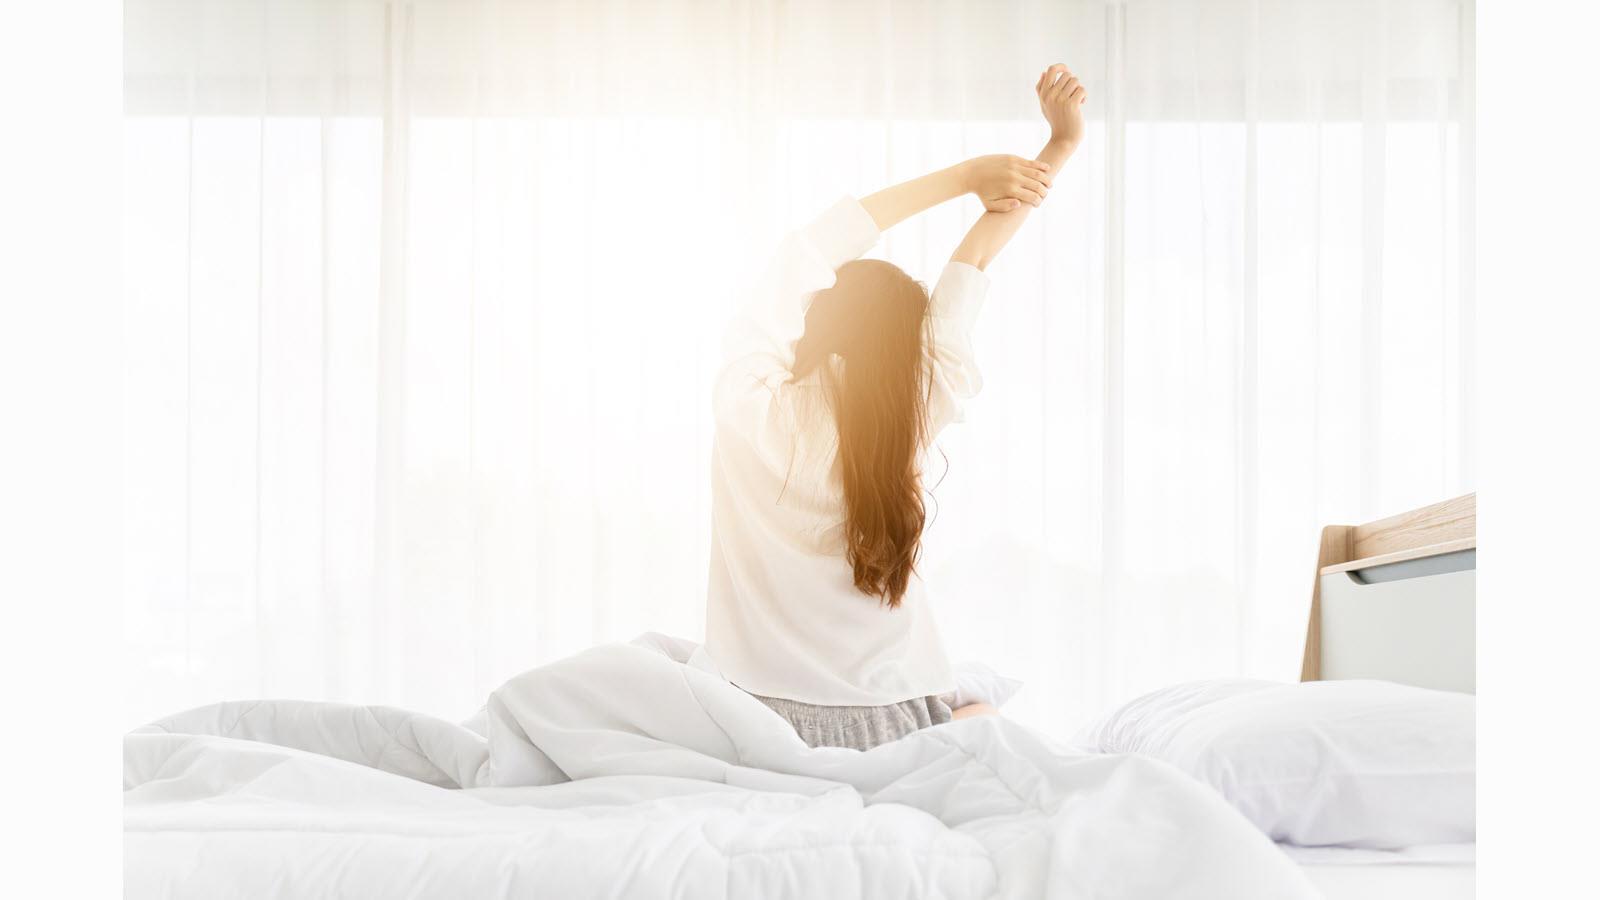 A woman takes a morning stretch in a white room with sun coming in the window.